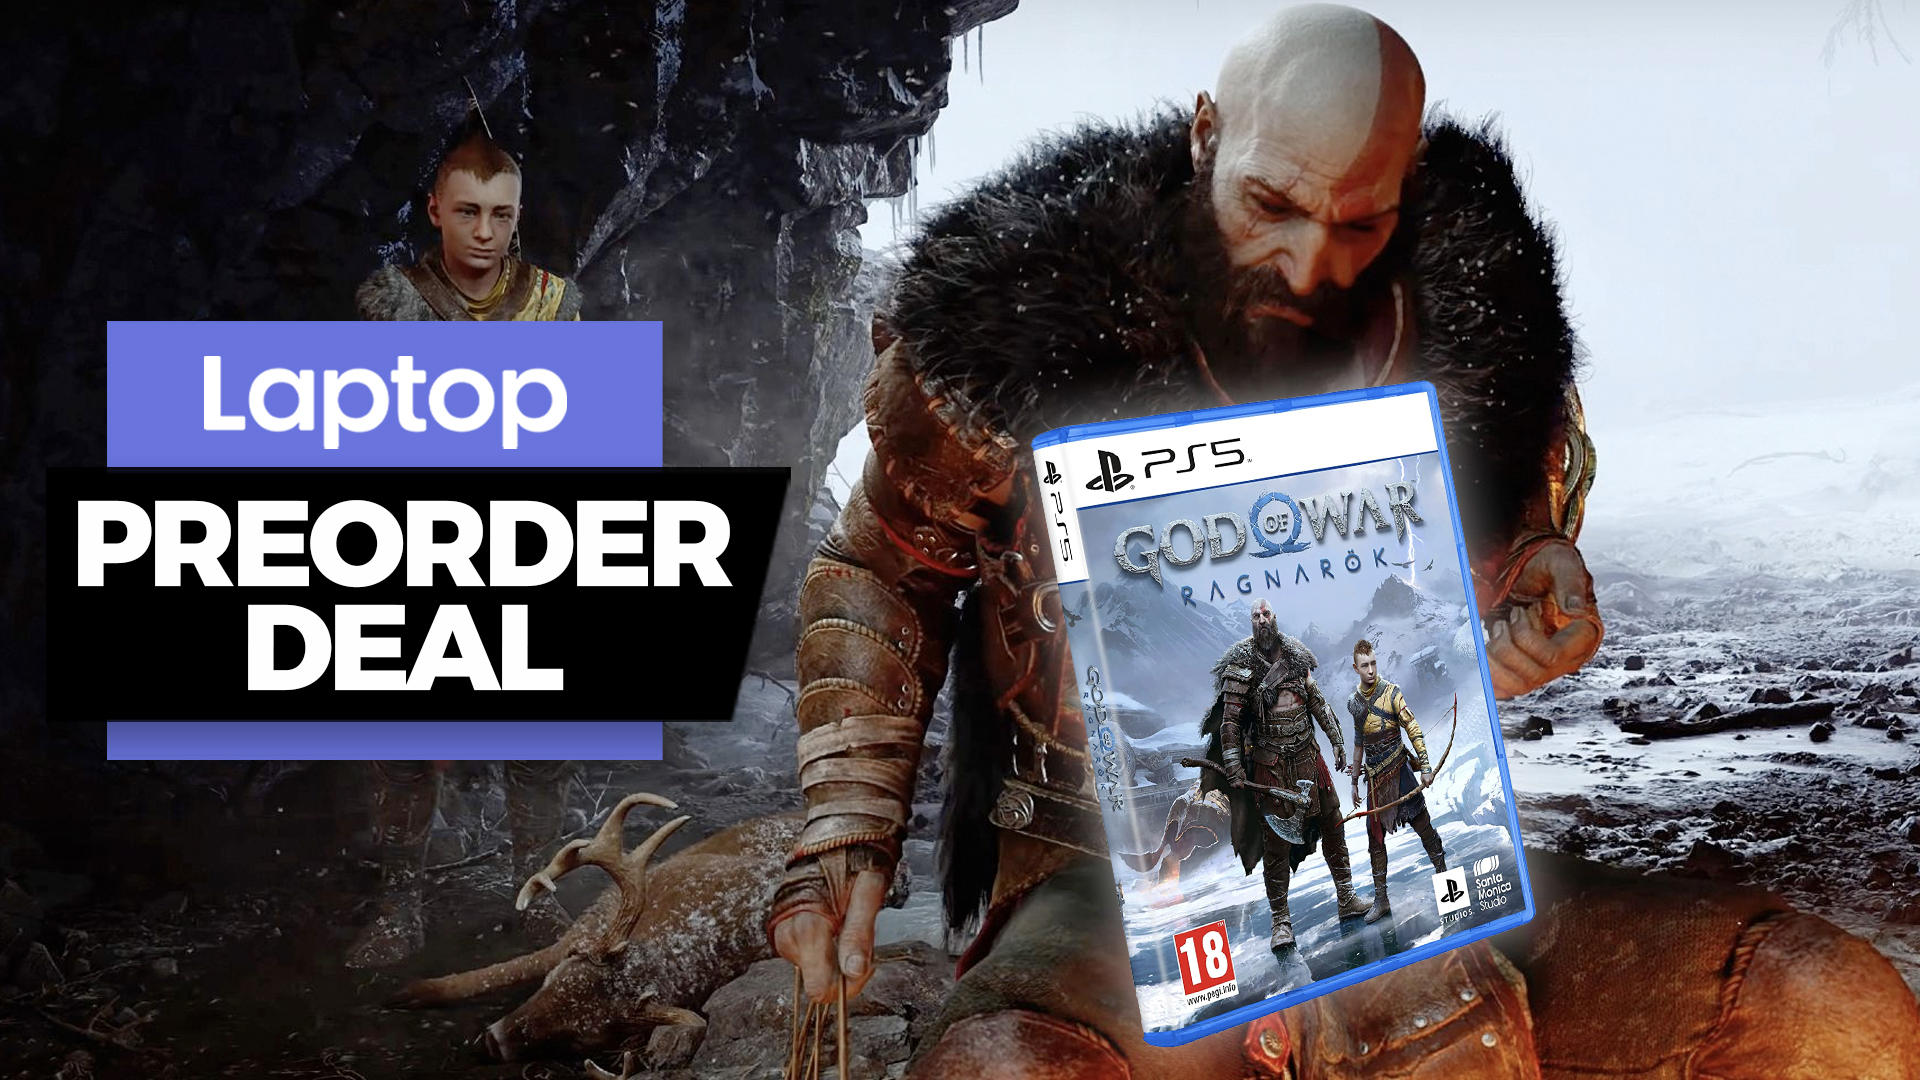 UK Daily Deals: Here's How to Save £10 on God of War Ragnarok Preorders for  PS5 - IGN